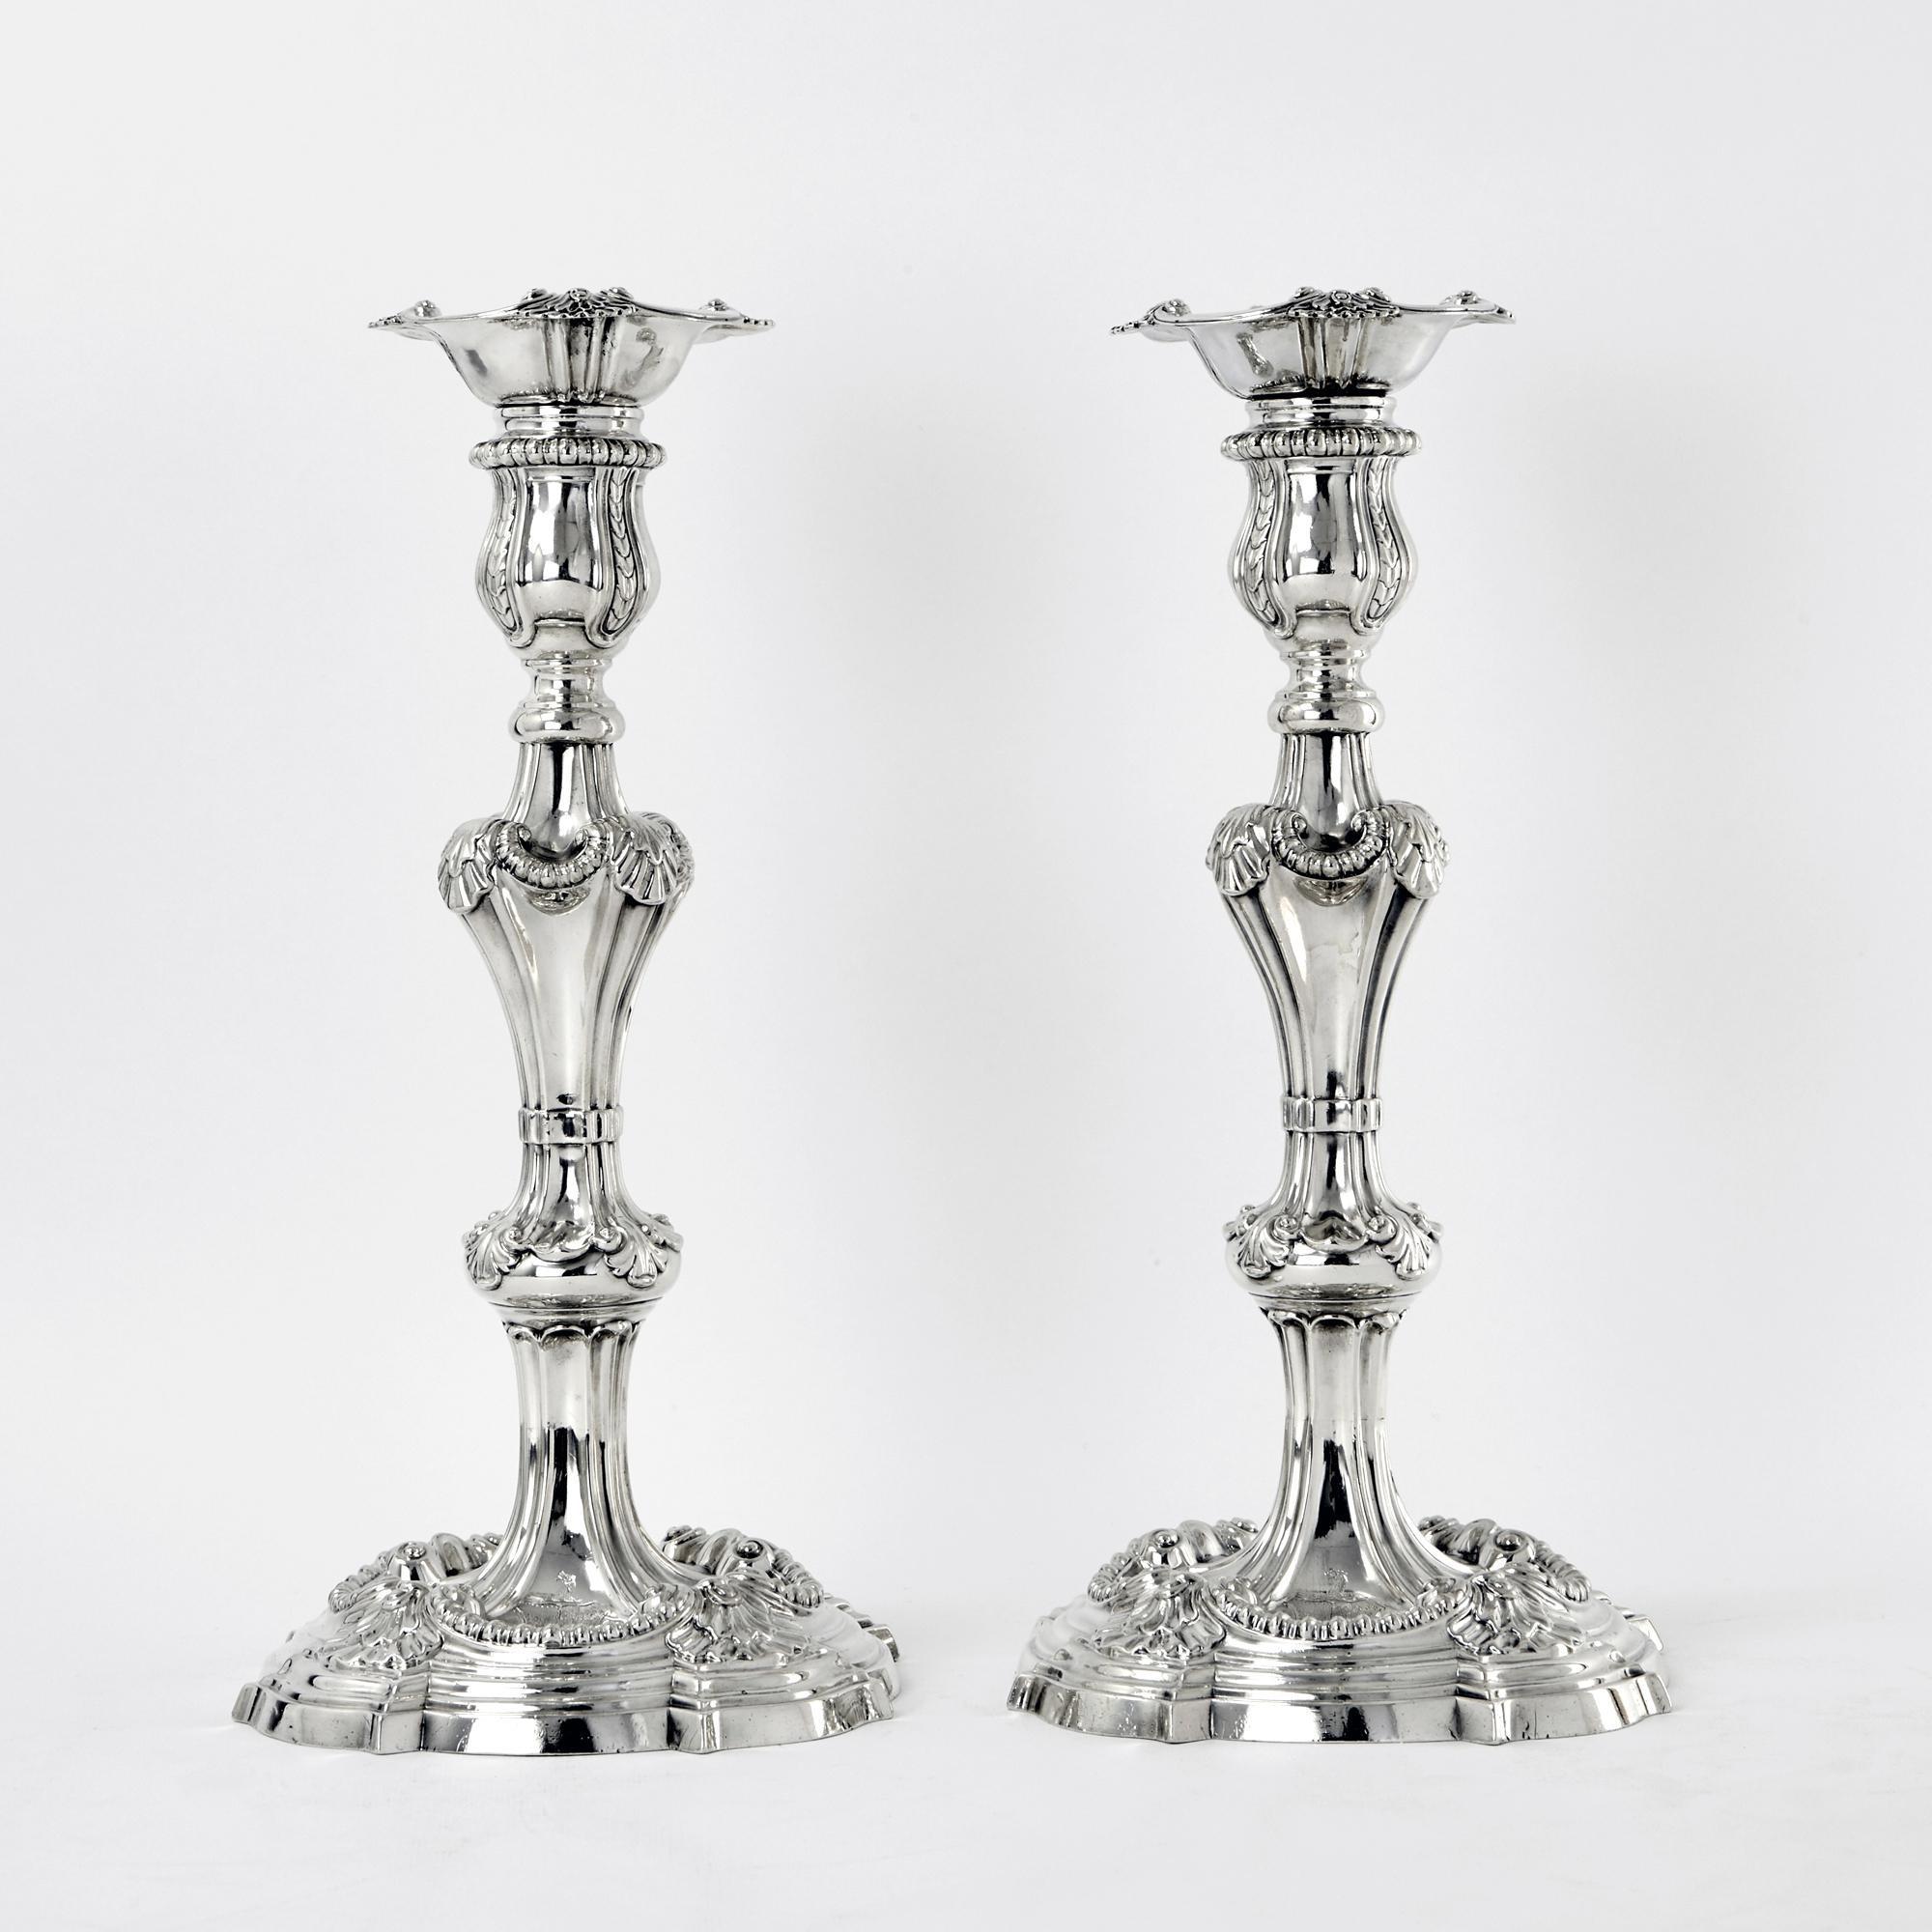 A spectacular pair of George III cast silver candlesticks made by Frederick Vonham in 1762 with the addition of a pair of 3-light arms by the same maker in 1771. The shaped, round bases have a border of four shell motifs connected by a heavy gadroon